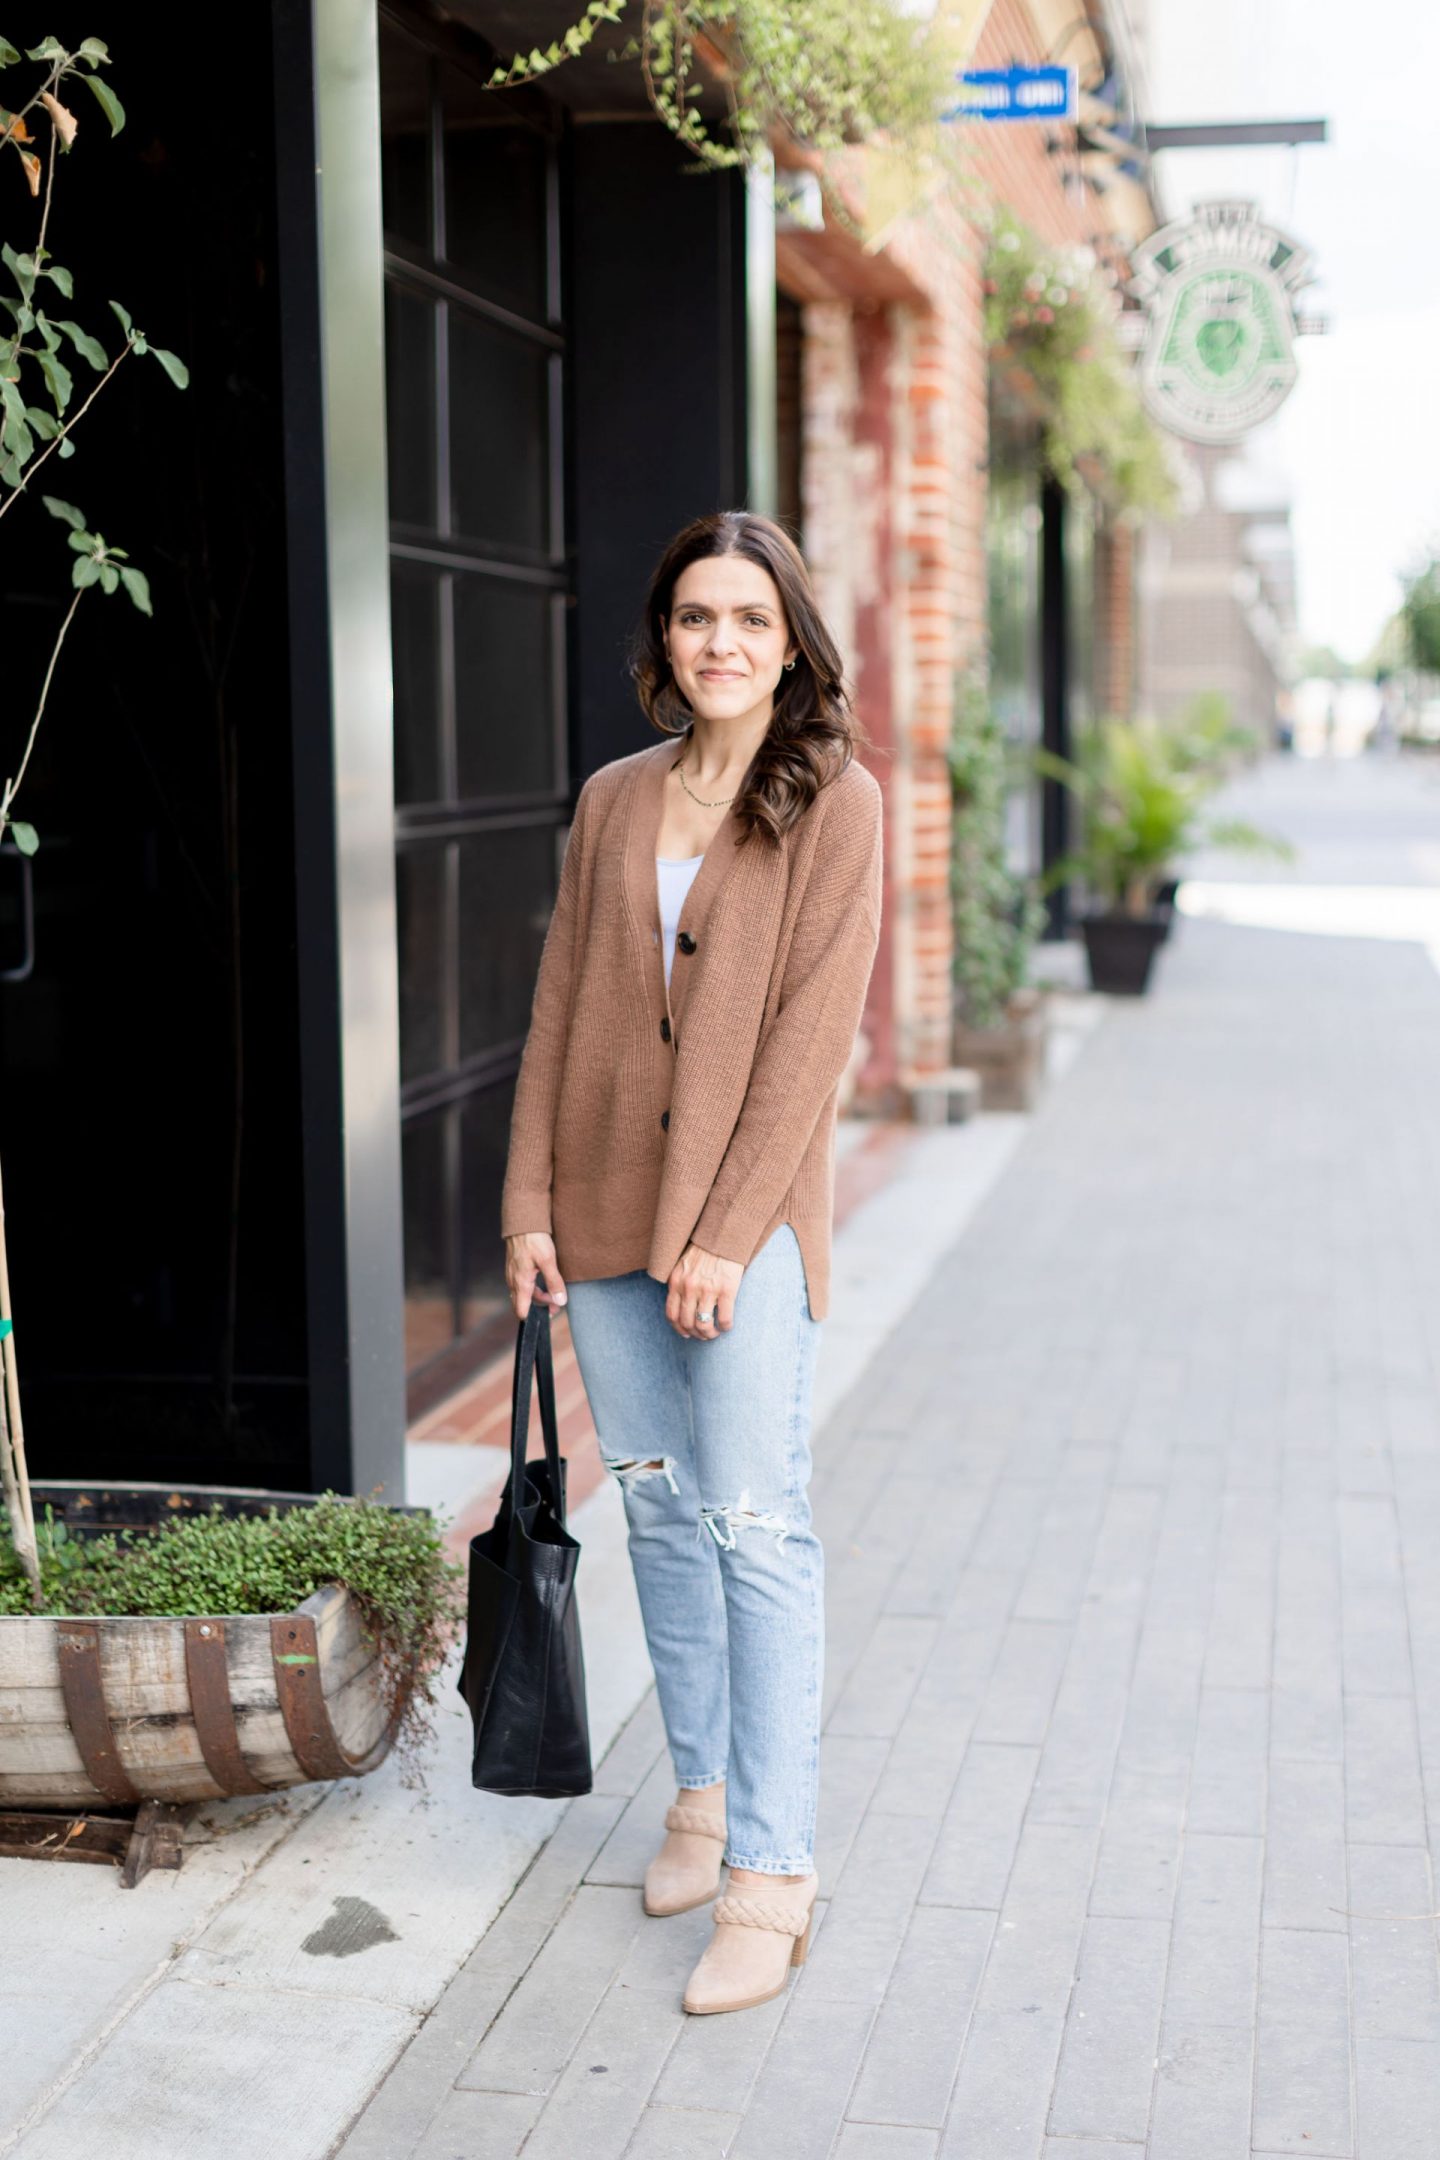 cardigan Agolde riley jeans Sept outfit idea